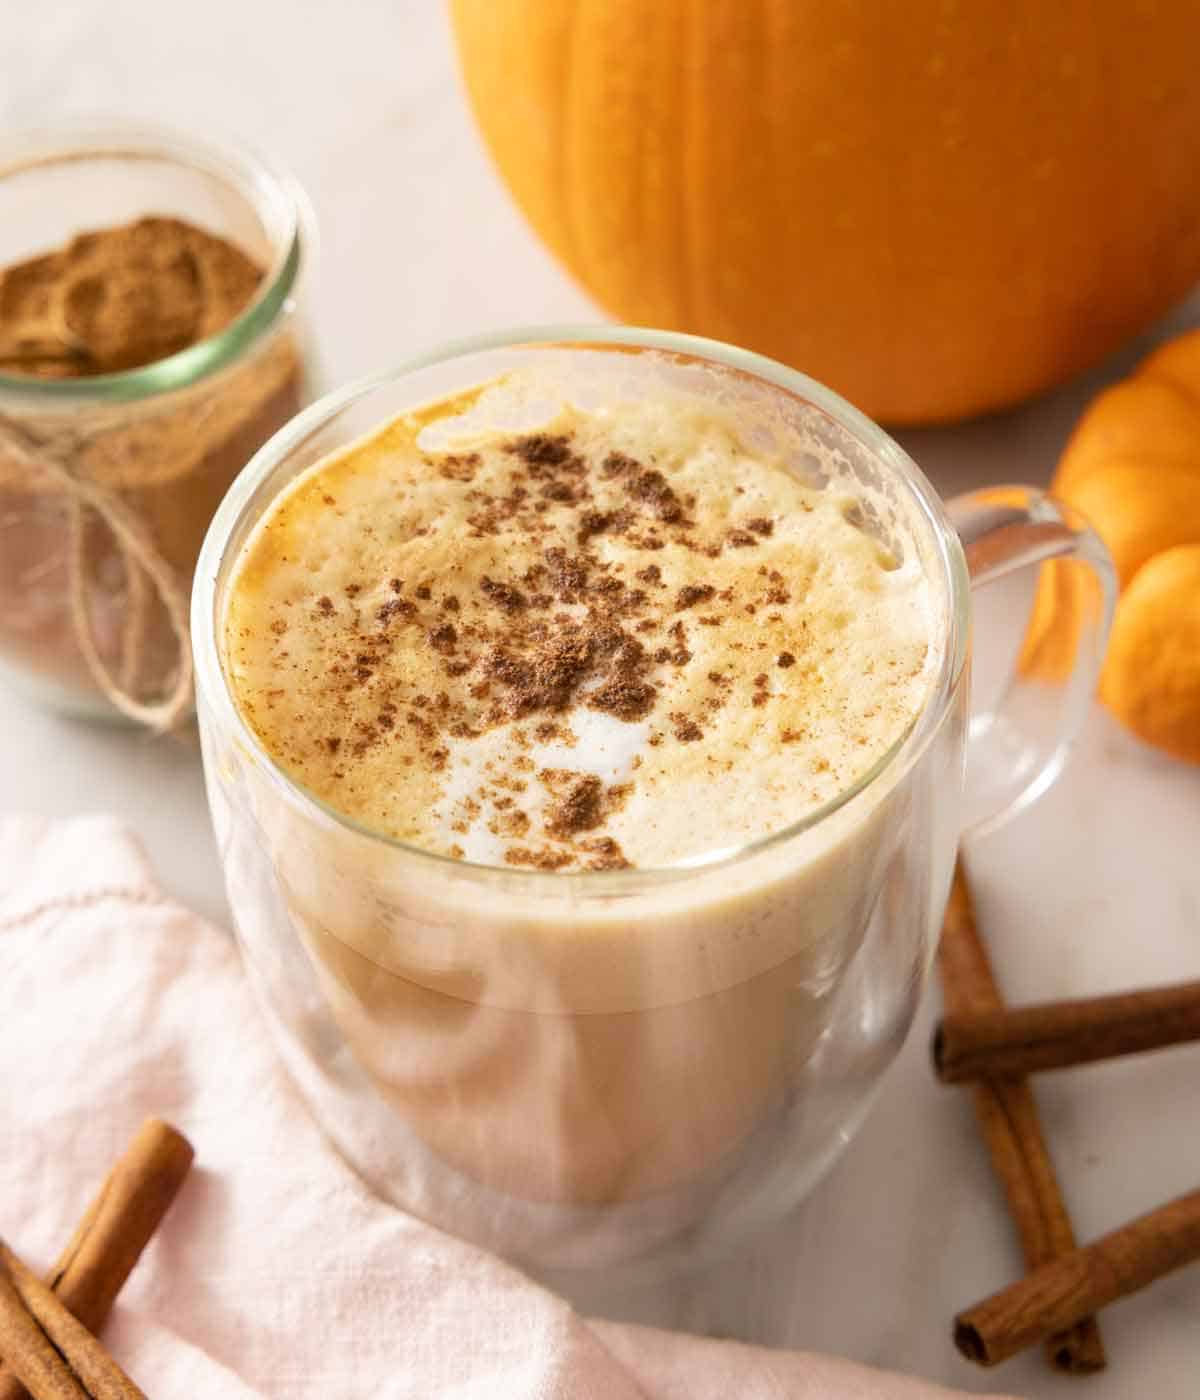 A latte with pumpkin pie spice sprinkled over the foam with cinnamon sticks scattered around and a jar of pumpkin pie spice in the background.